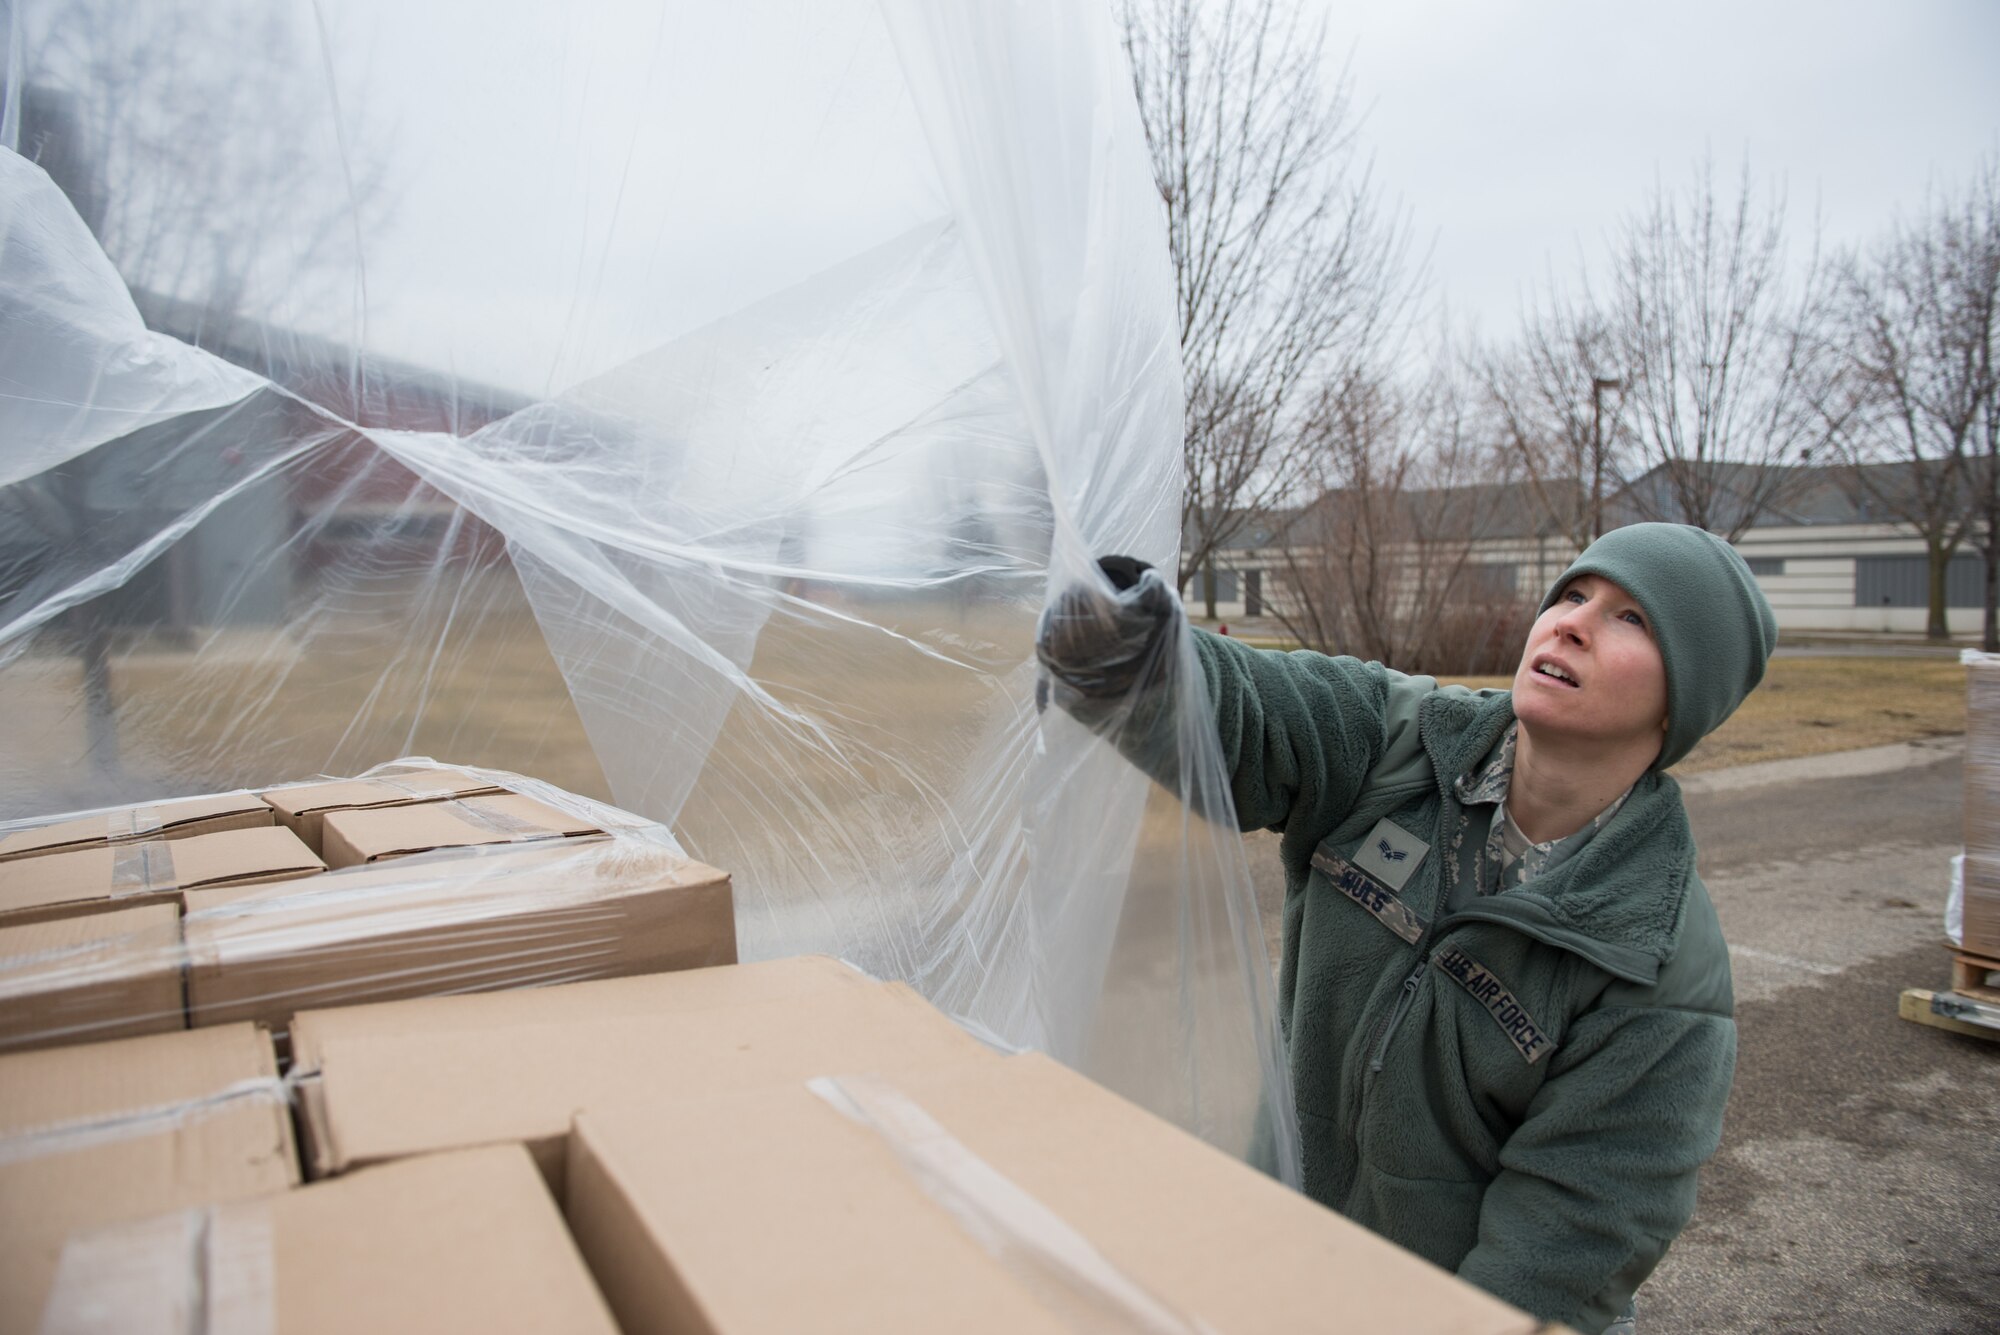 Senior Airman Megan Huls prepares pallets of cargo at the 27th Aerial Port Squadron in support of the humanitarian mission to Afghanistan on 5 March 5. (U.S. Air Force Photo by Staff Sgt. Trevor Saylor)